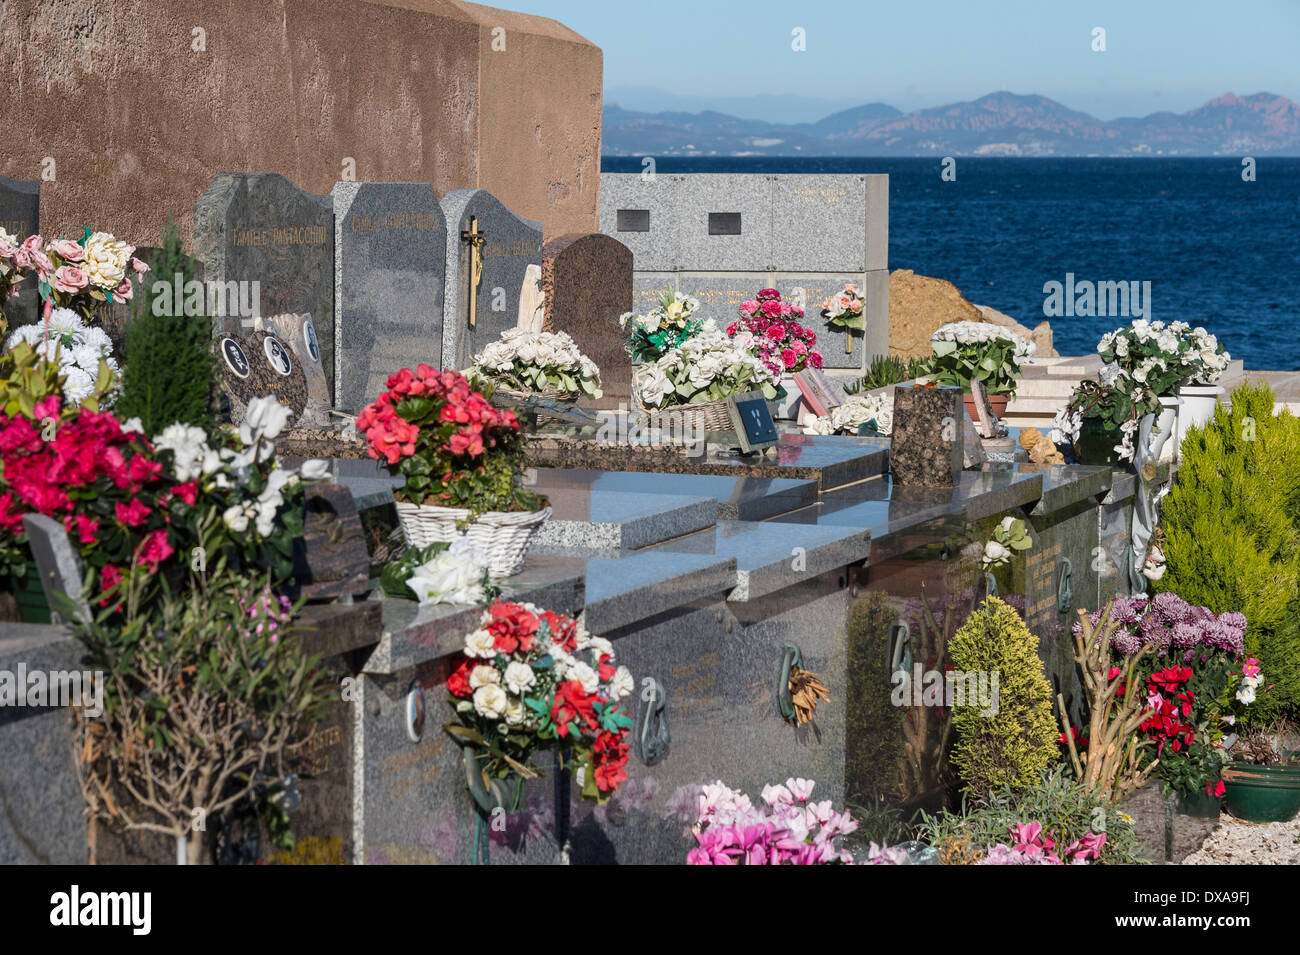 Cemetery with fresh flowers, St Tropez, France Stock Photo